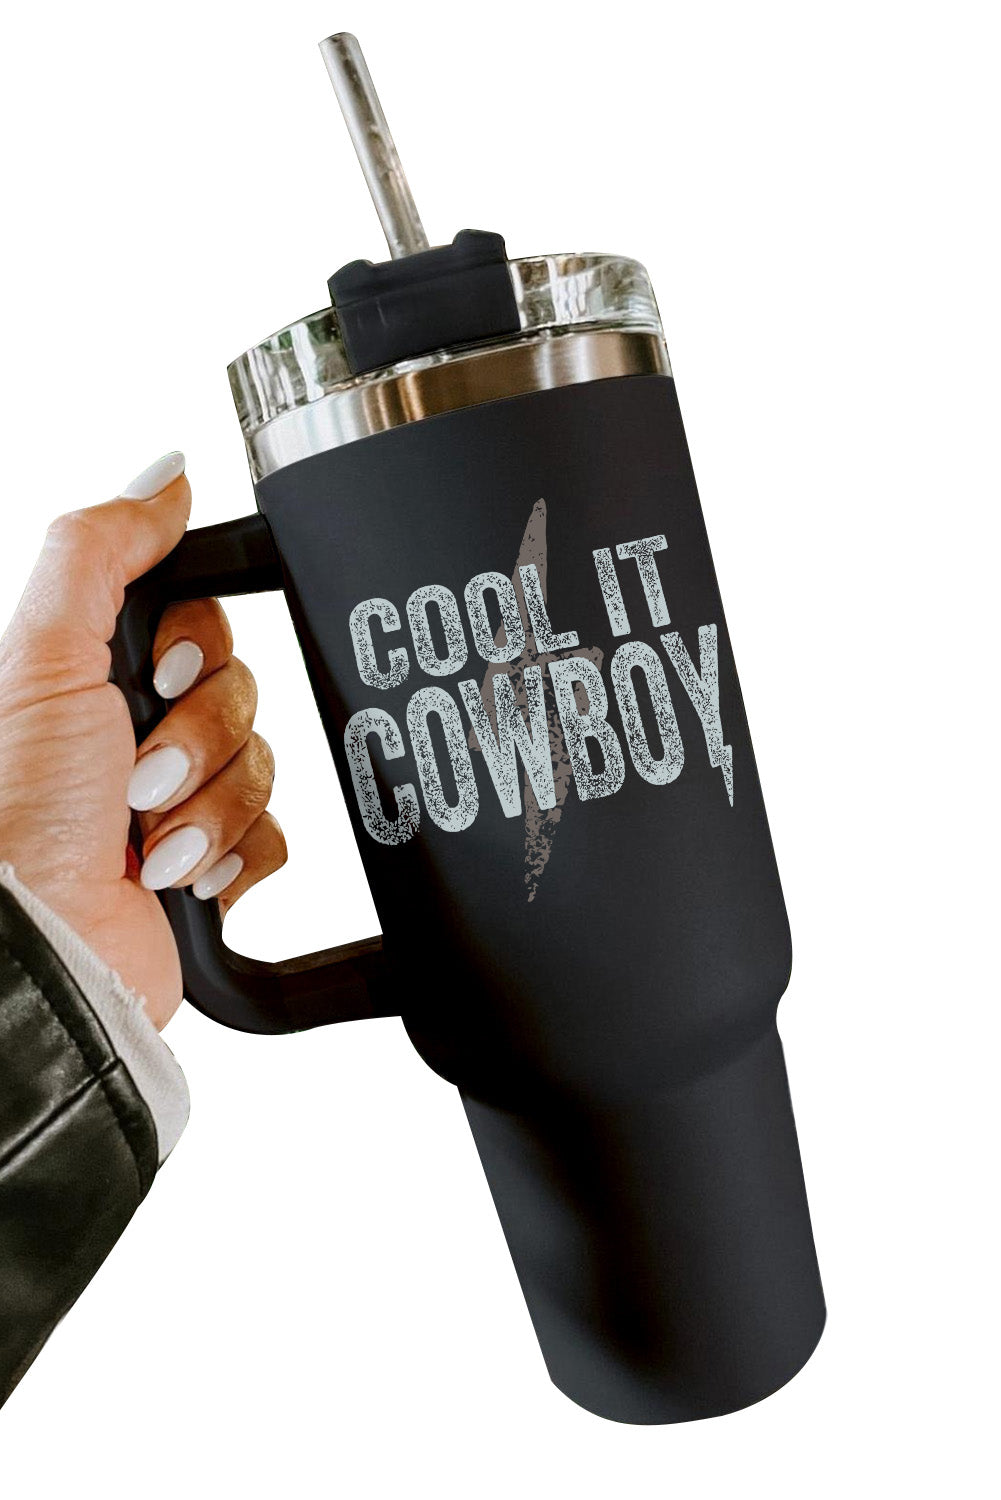 Black COOL IT COWBOY Lightning Print Stainless Steel Insulate Cup 40oz